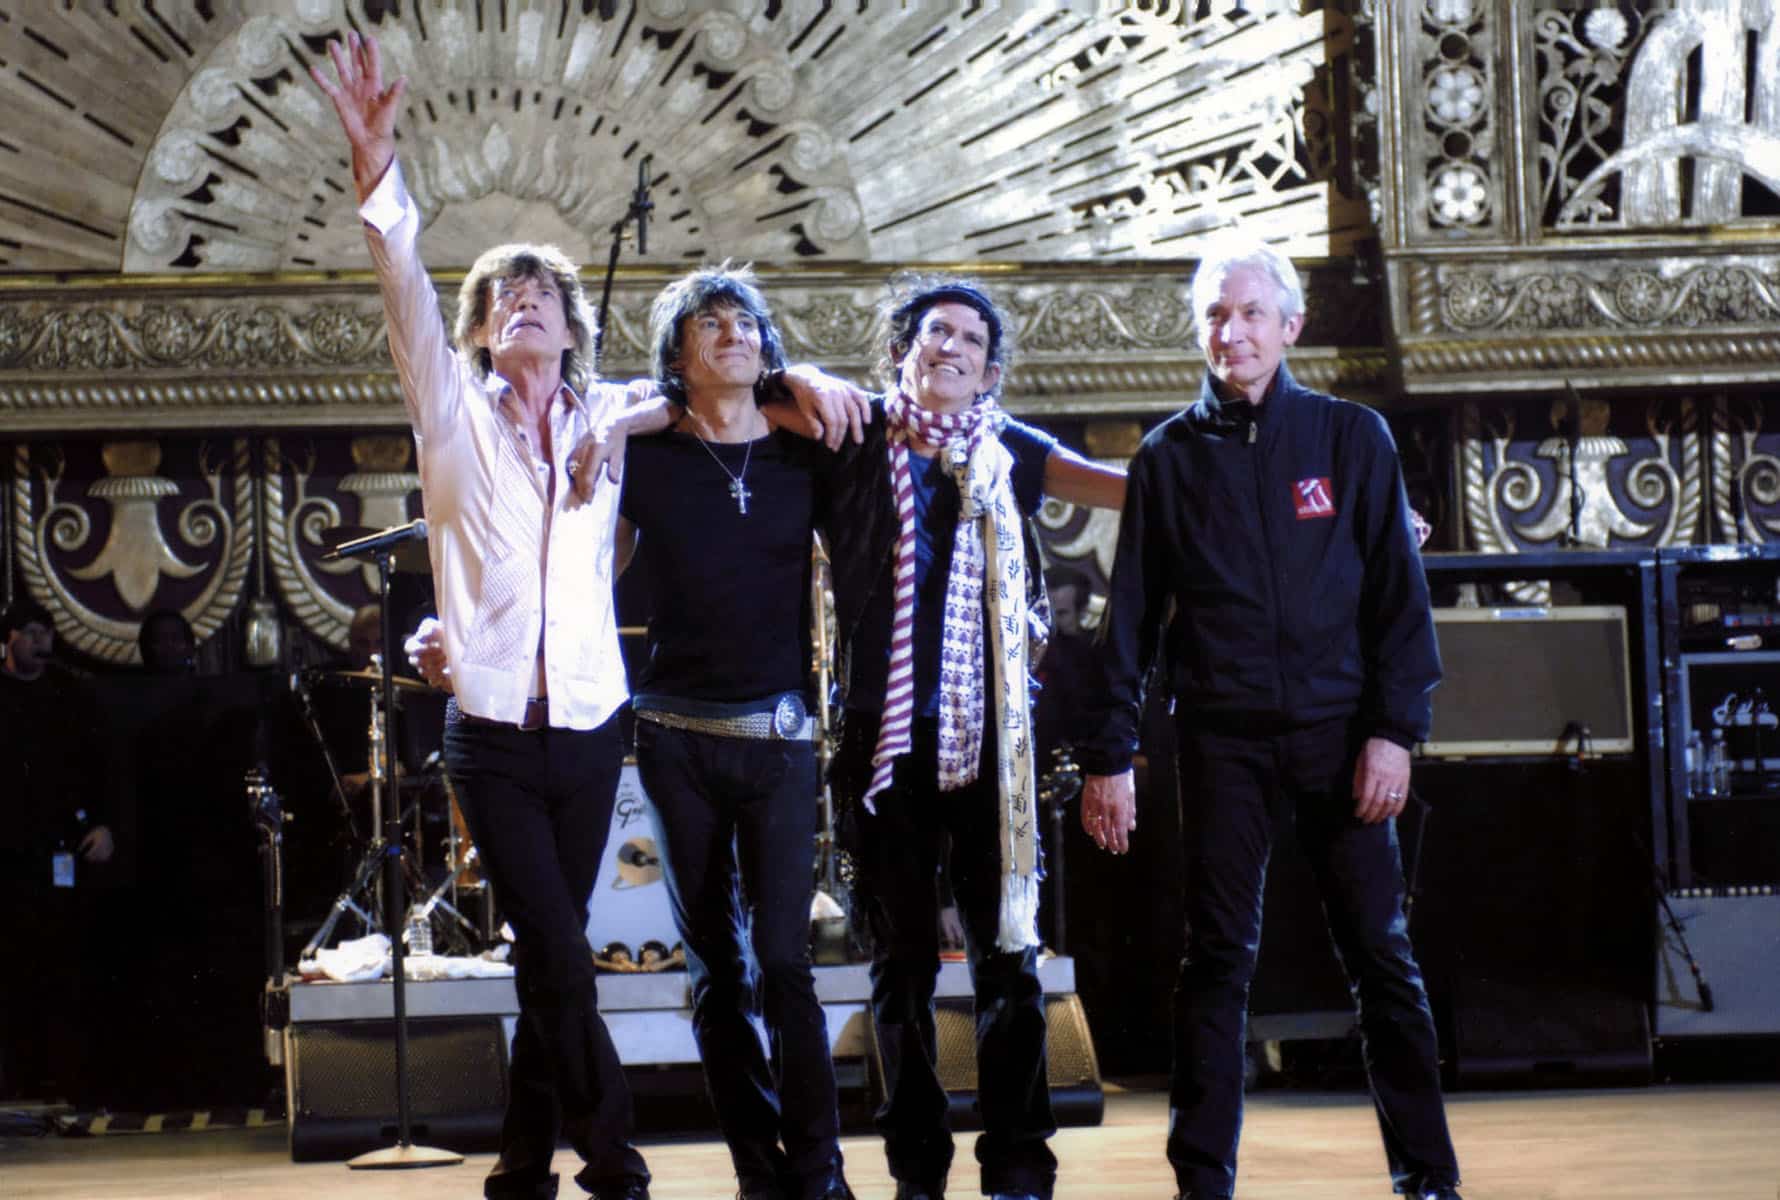 SHINE A LIGHT, The Rolling Stones: Mick Jagger, Ron Wood, Keith Richards, Charlie Watts, 2007